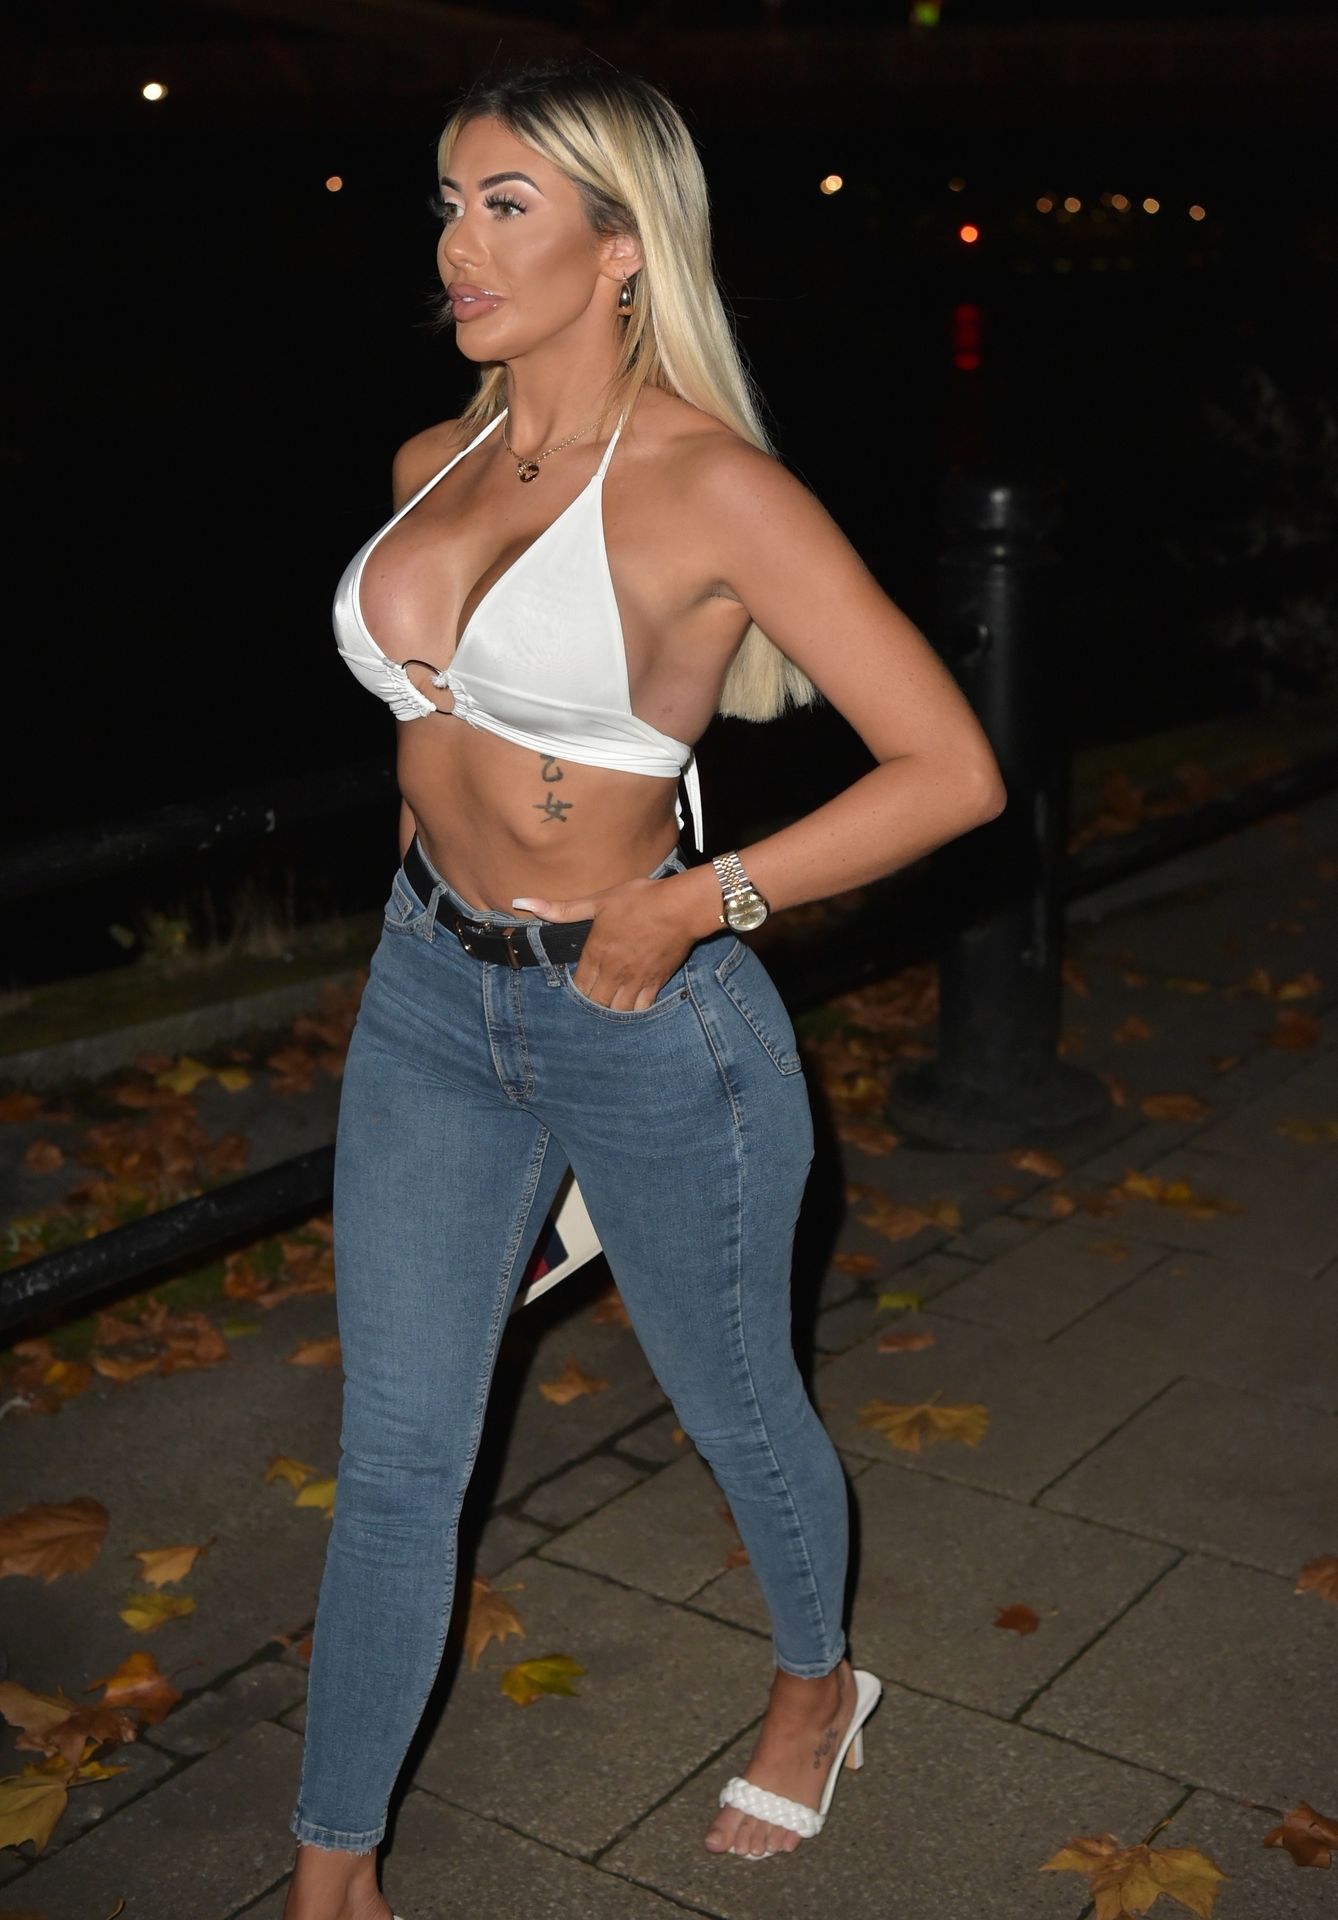 Chloe Ferry Hits the Toon as She Enjoys a Night Out with a Fr
iend (34 Photos)